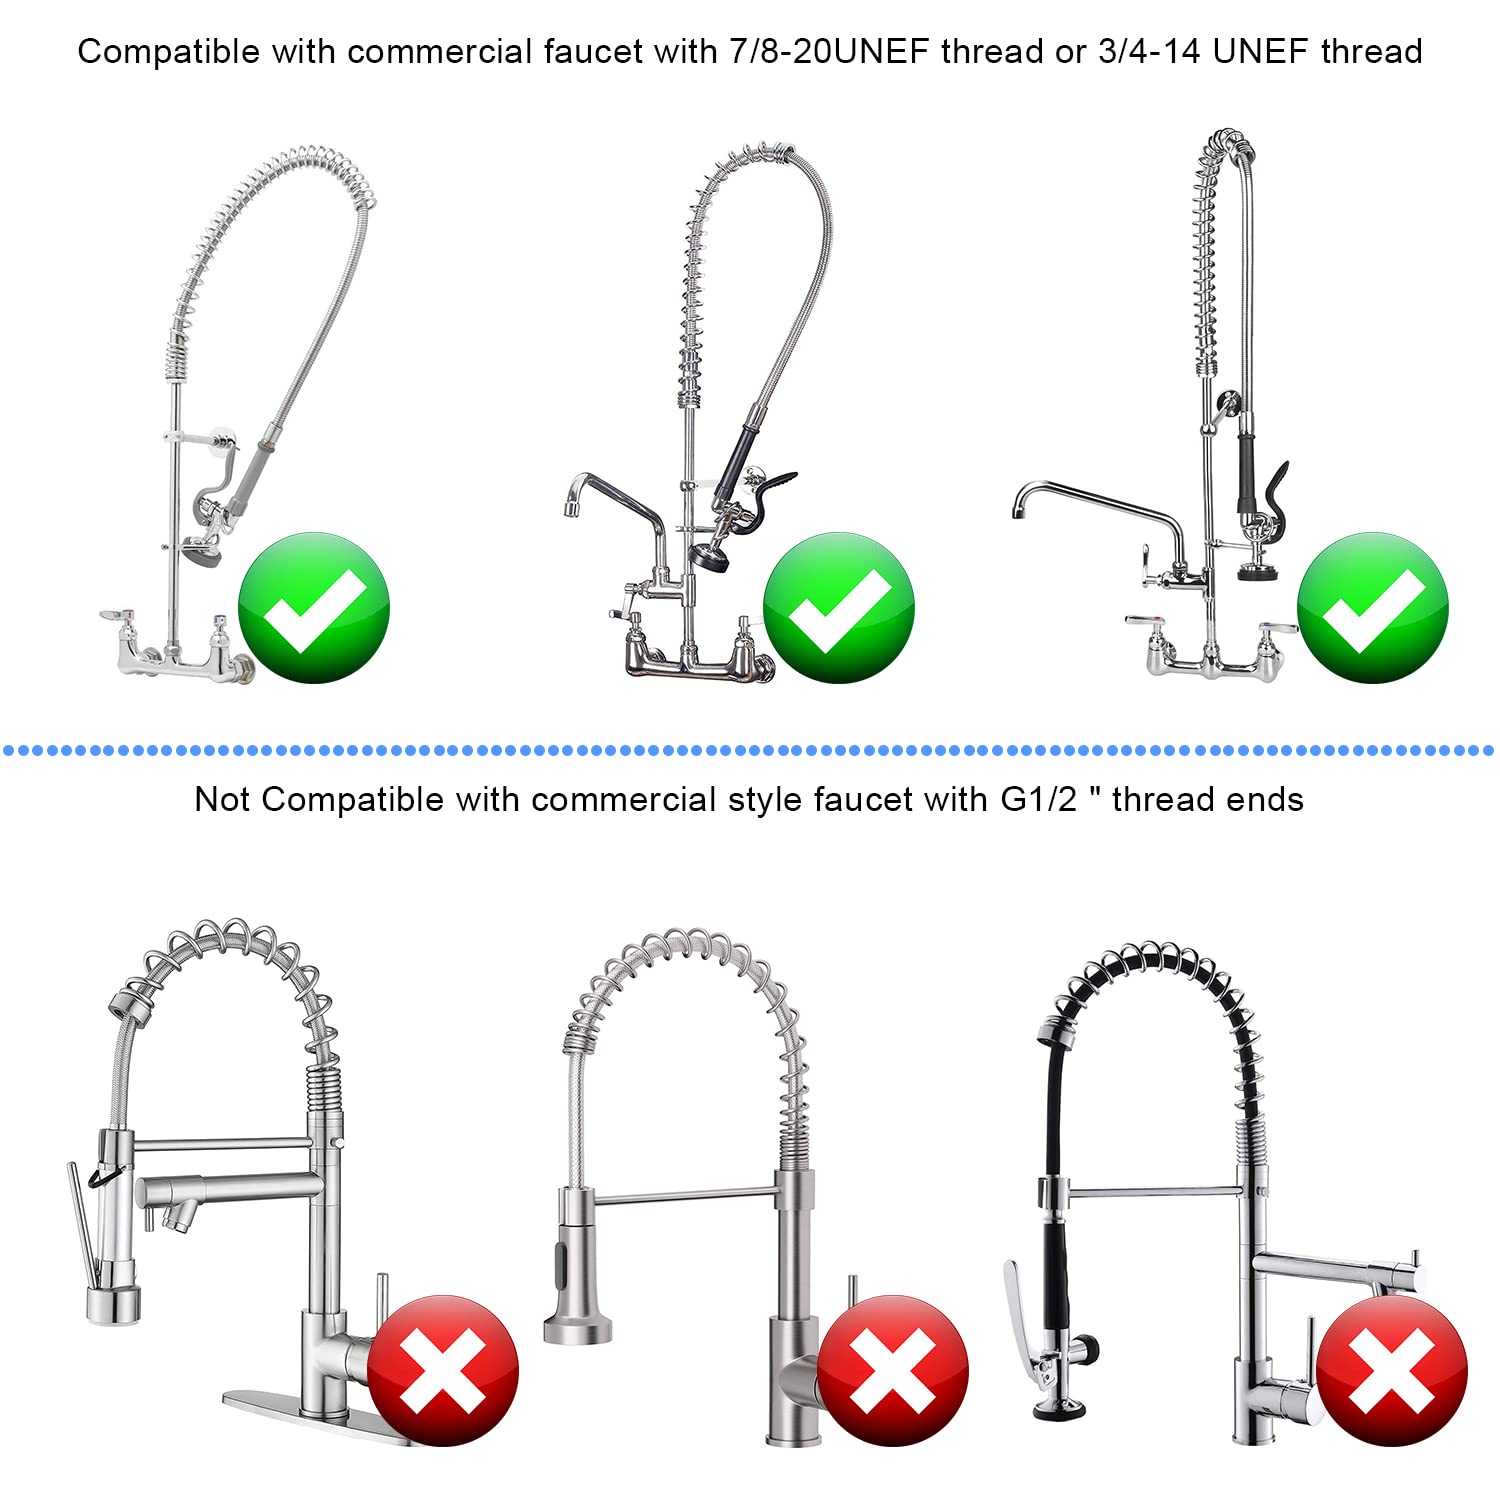 TBER Replacement B-0044-H Pre Rinse Sprayer Hose for TS Brass, 44” Flexible Stainless Commercial Kitchen Sink Faucet Hose with Heat Resistant Grip Handle(Gray)